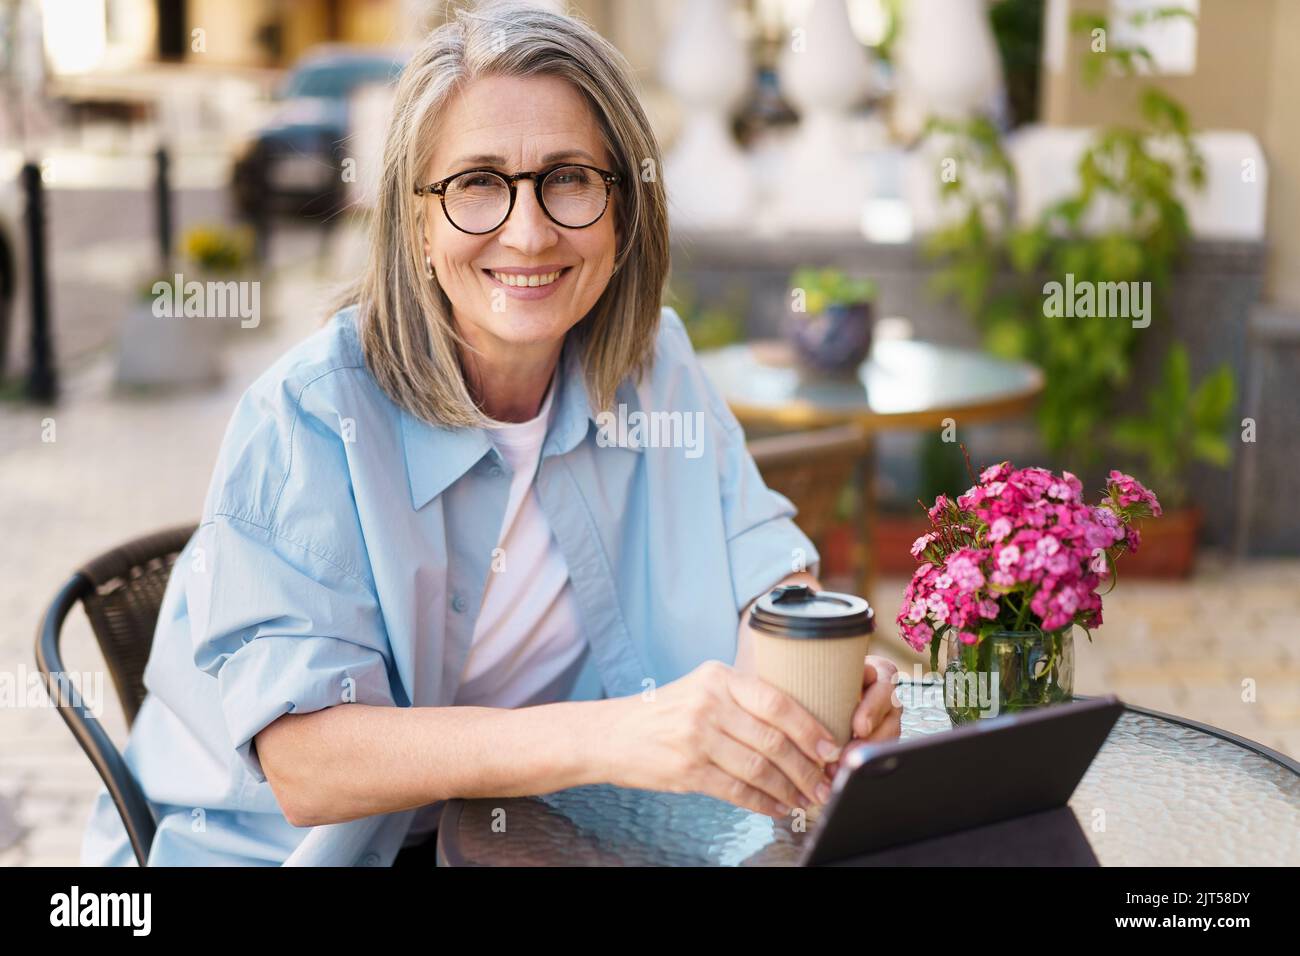 Mature European grey hair charming woman drink coffee using digital tablet sitting at table of street cafe. Mature silver hair woman working outdoors city cafe, wearing white t-shirt and blue shirt.  Stock Photo